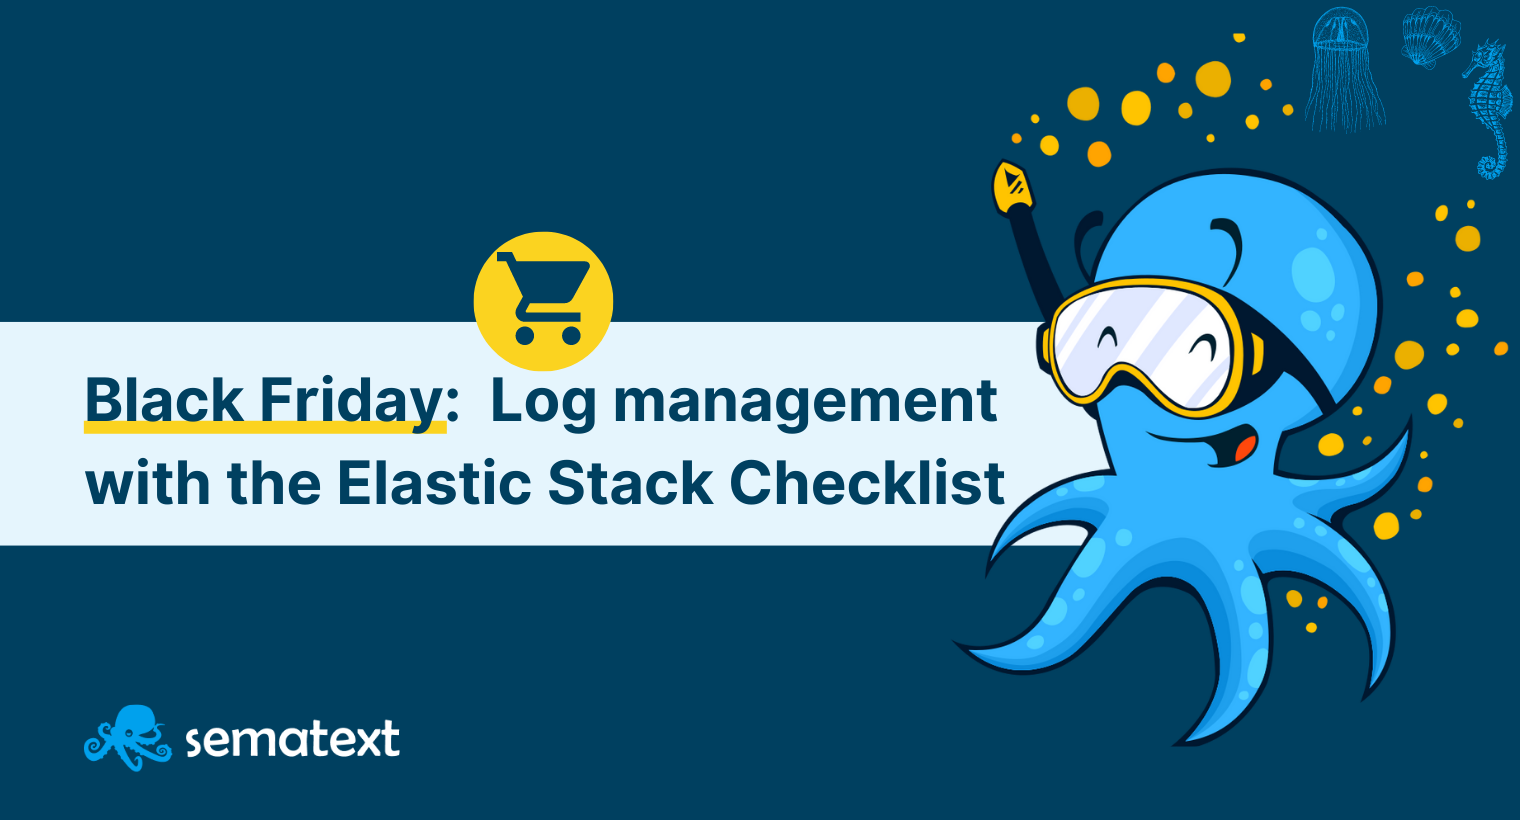 Black Friday log management (with the Elastic Stack) checklist